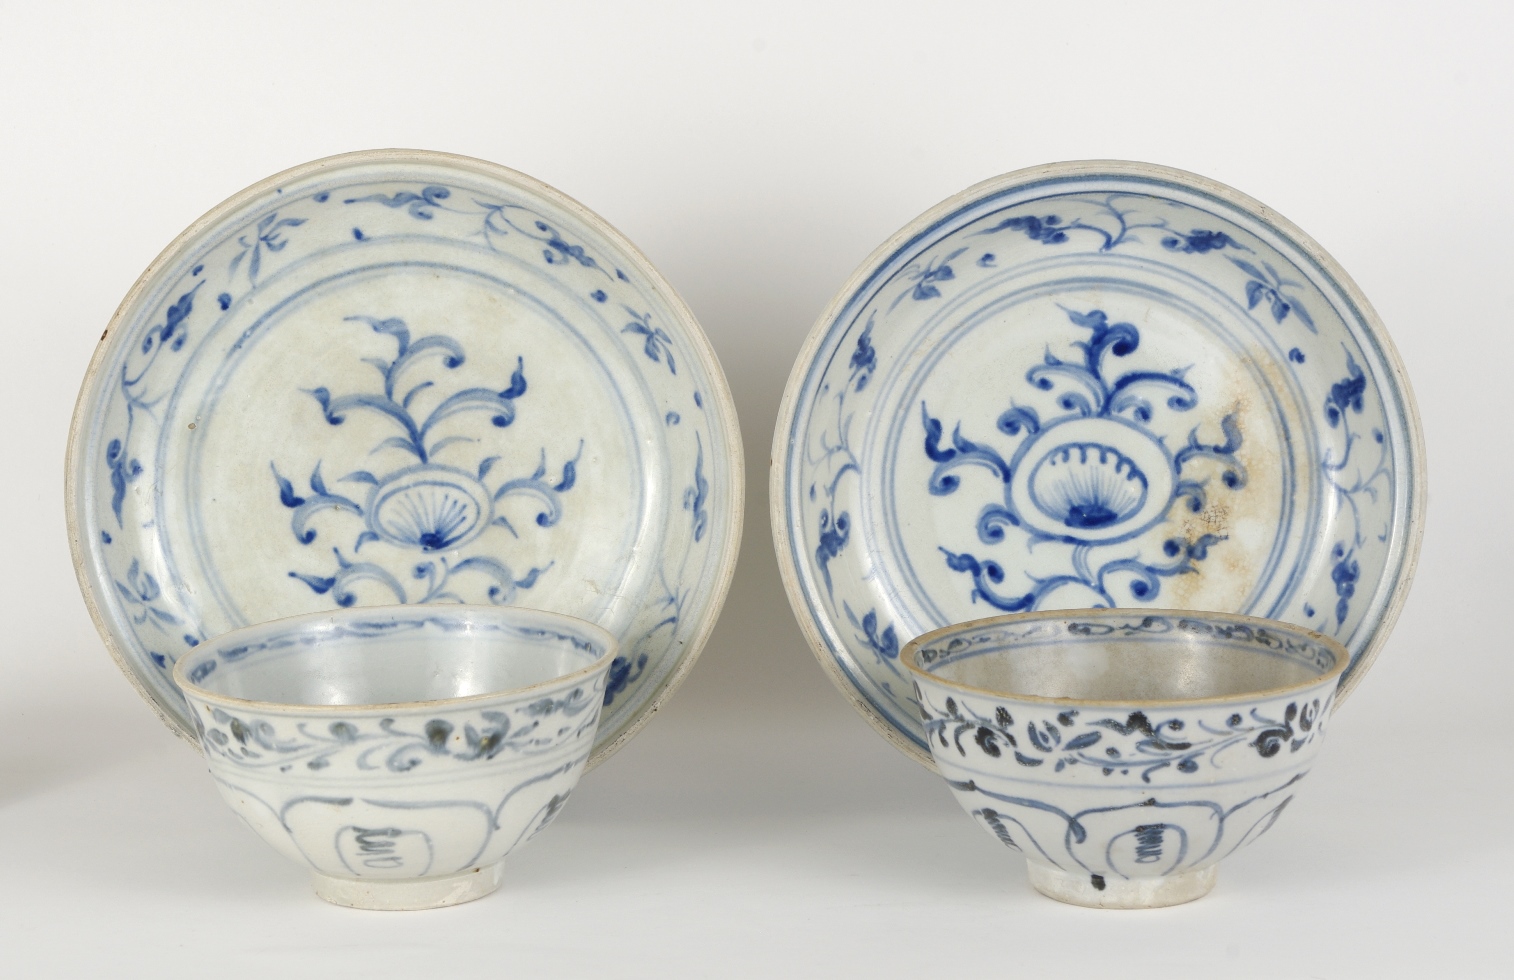 Two Blue and White Serving Dishes from the Hoi An Hoard, c. 1500